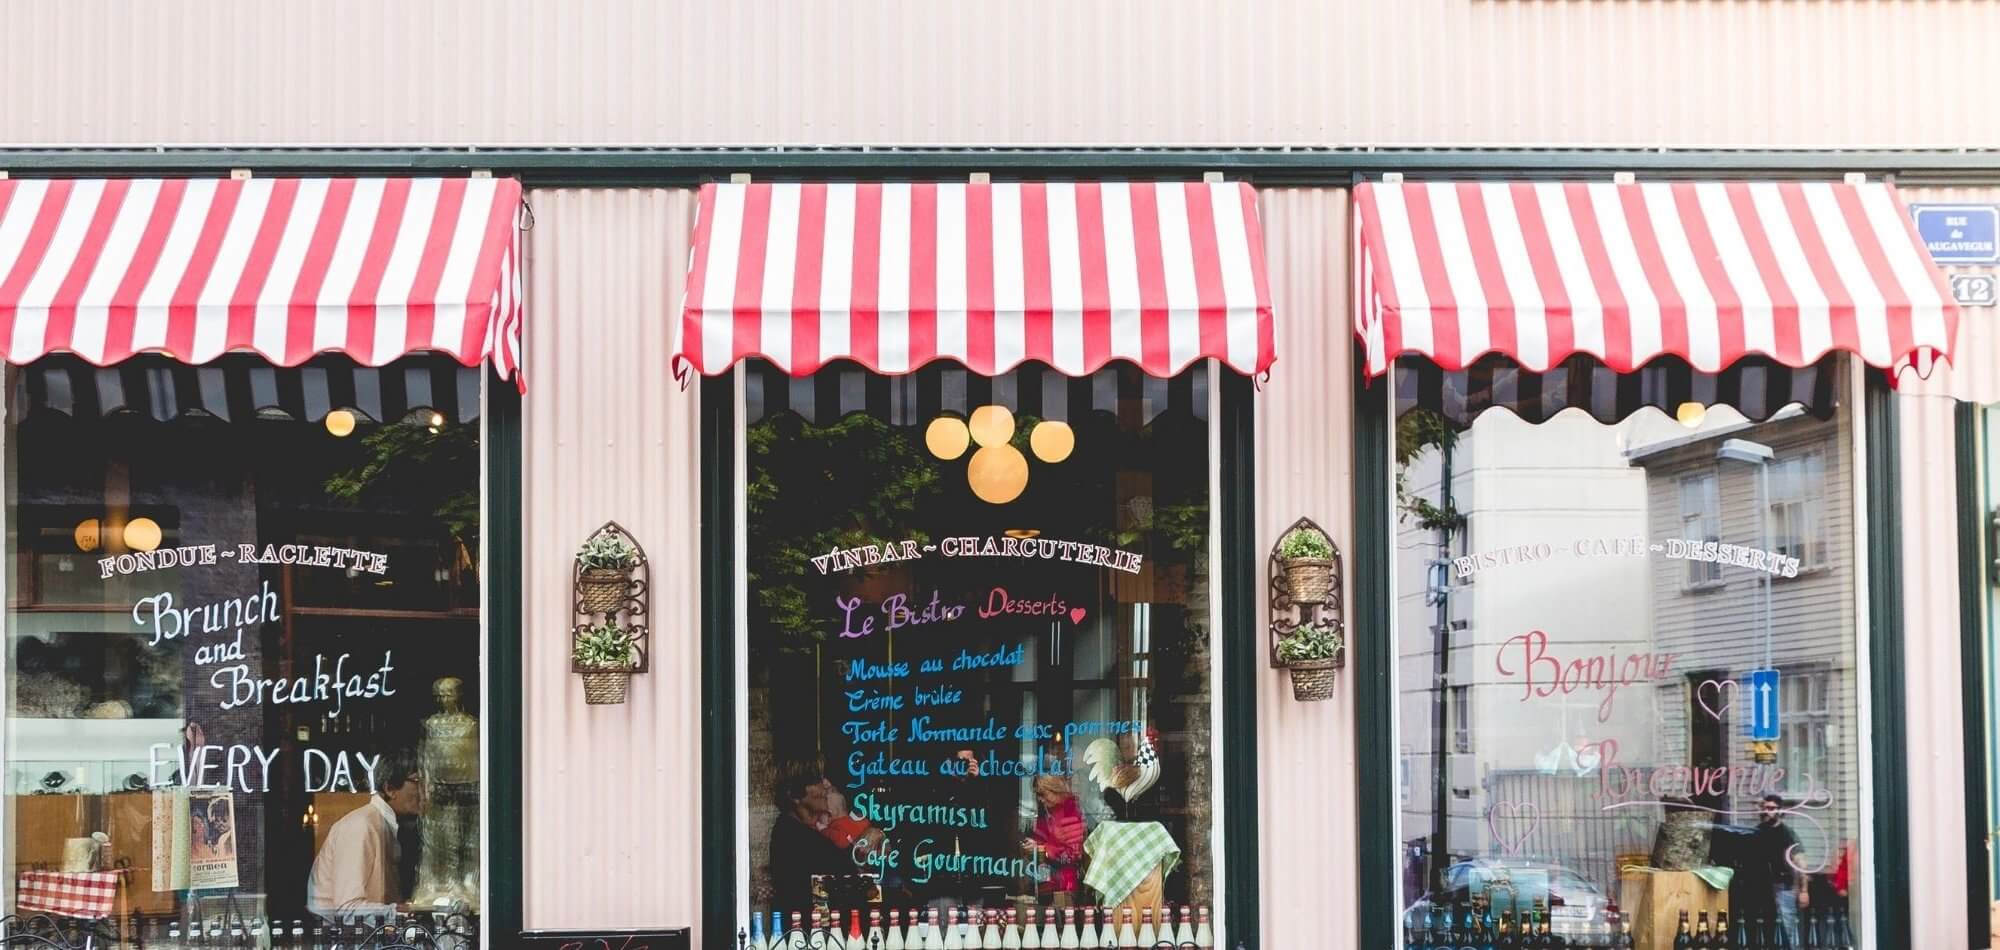 small business storefronts